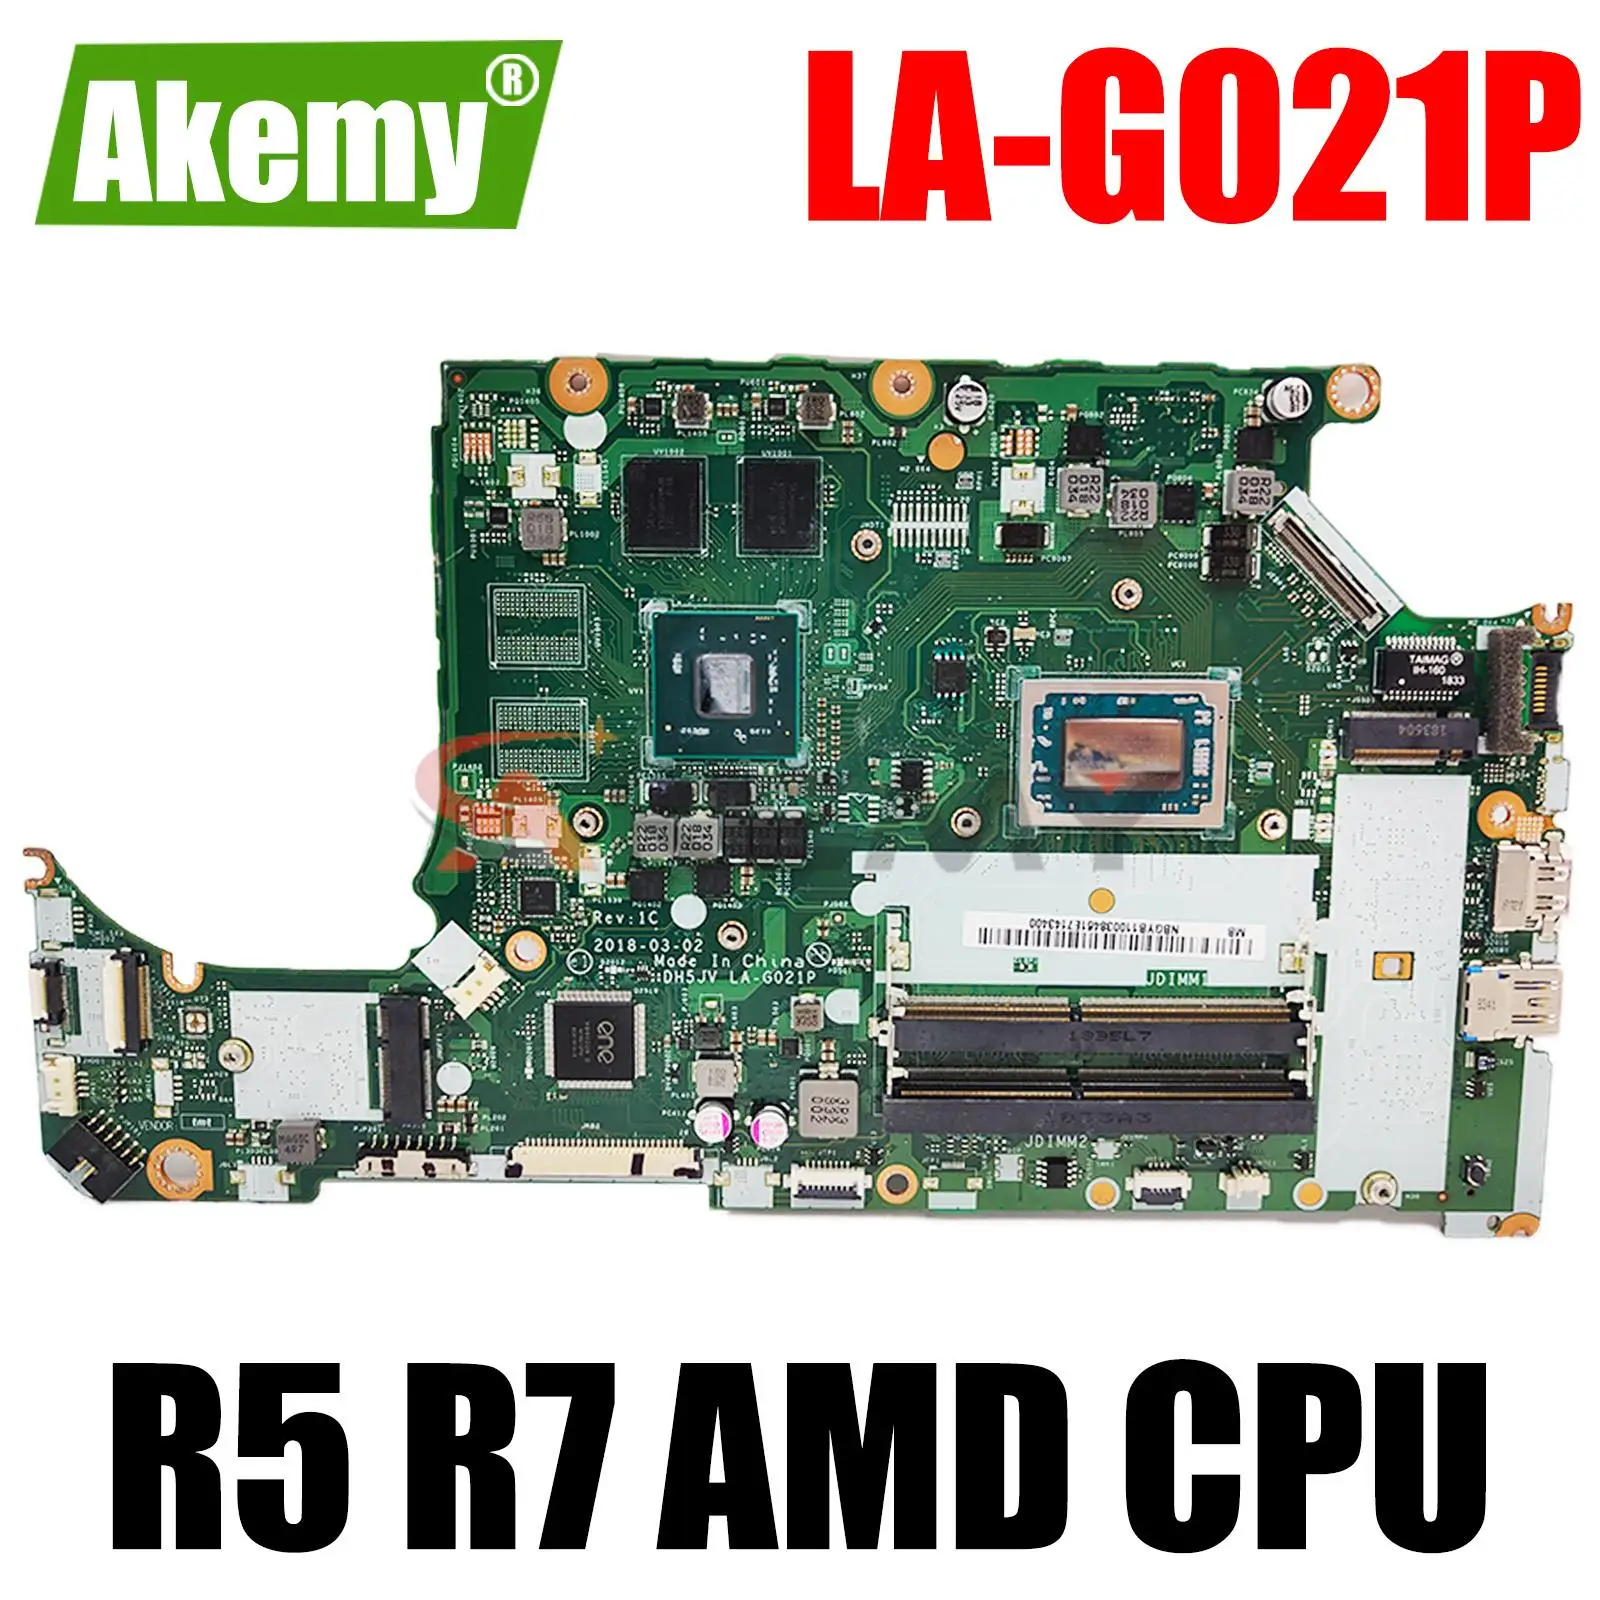 

A315-41 LA-G021P Motherboard for Acer Nitro 5 AN515-52 A315-41 LA-G021P Laptop Motherboard Mainboard RX530/540 w/ R5 R7 AMD CPU